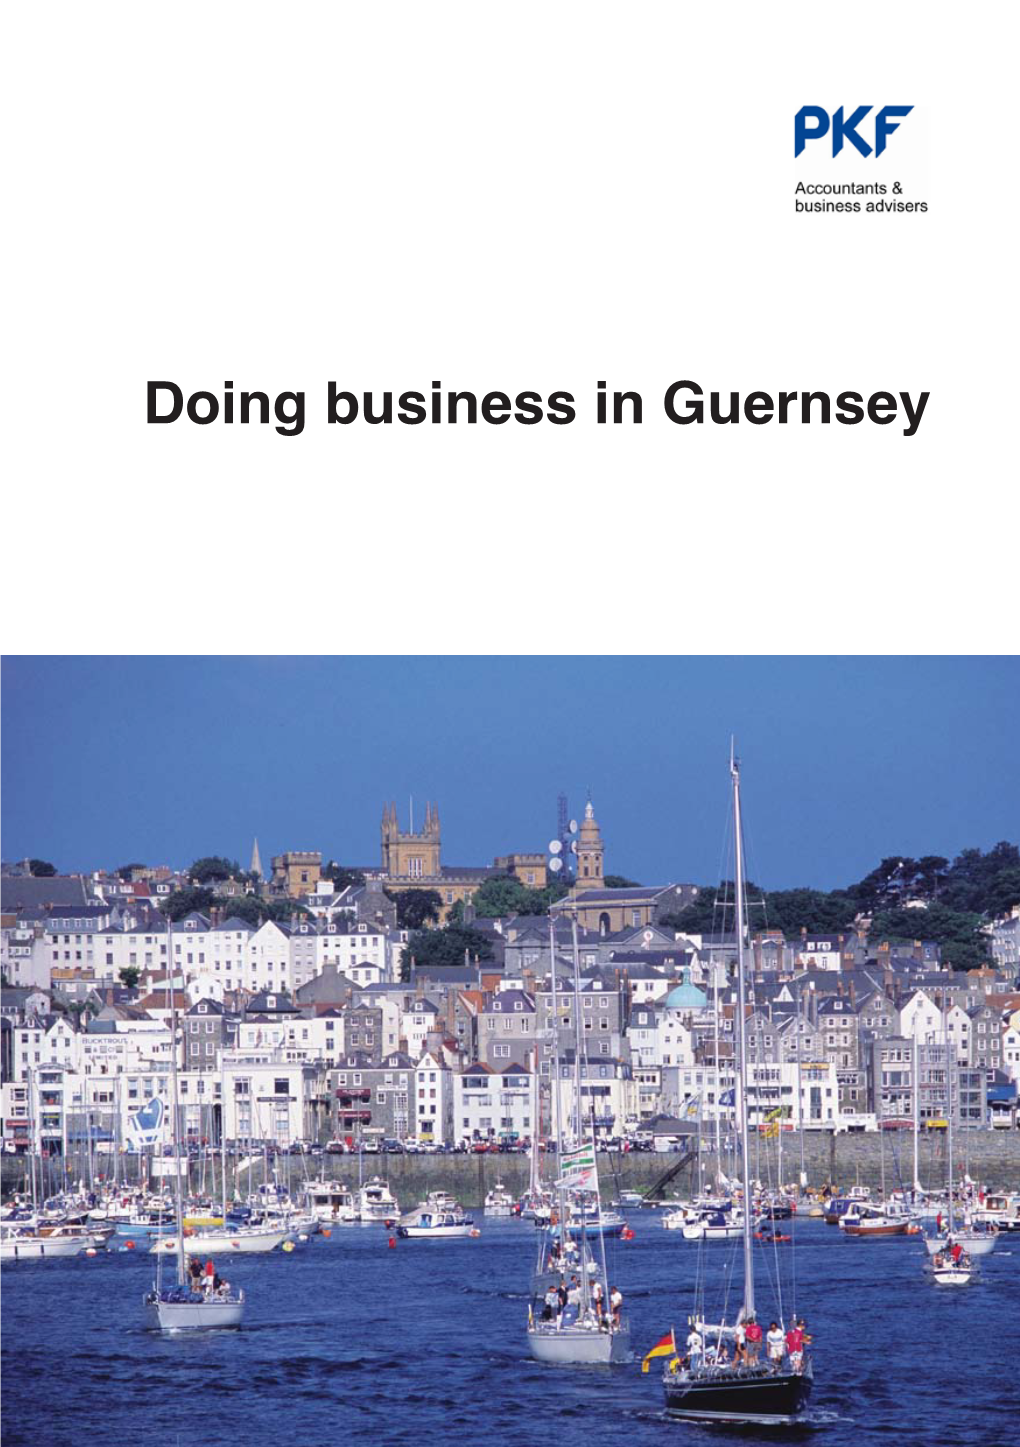 PKF Doing Business in Guernsey